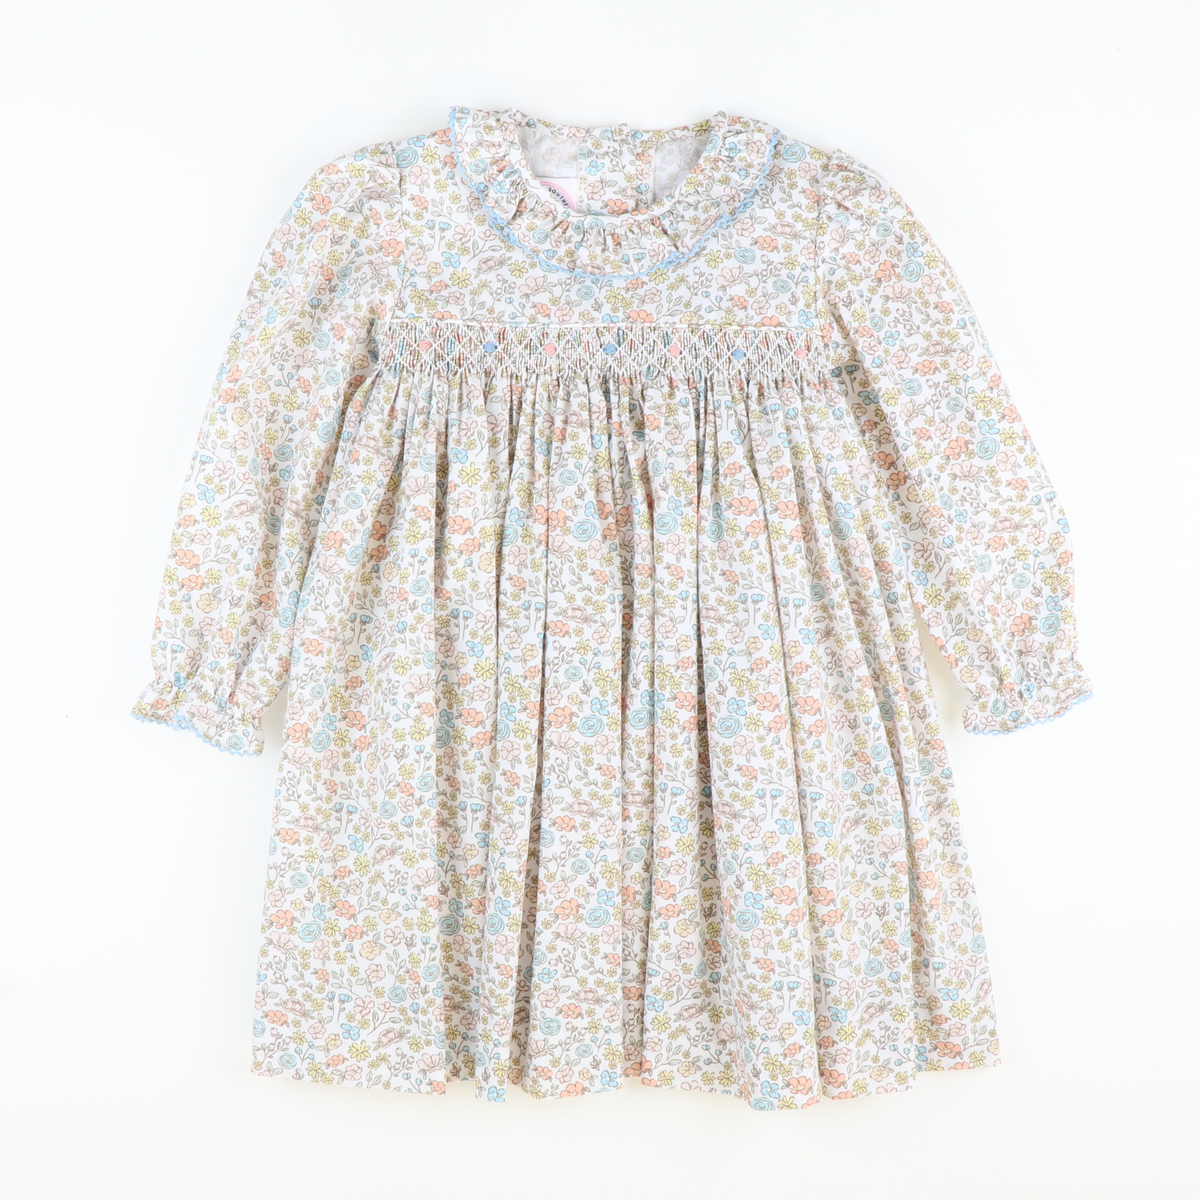 Smocked Autumn Floral Ruffle Neck Dress - Stellybelly